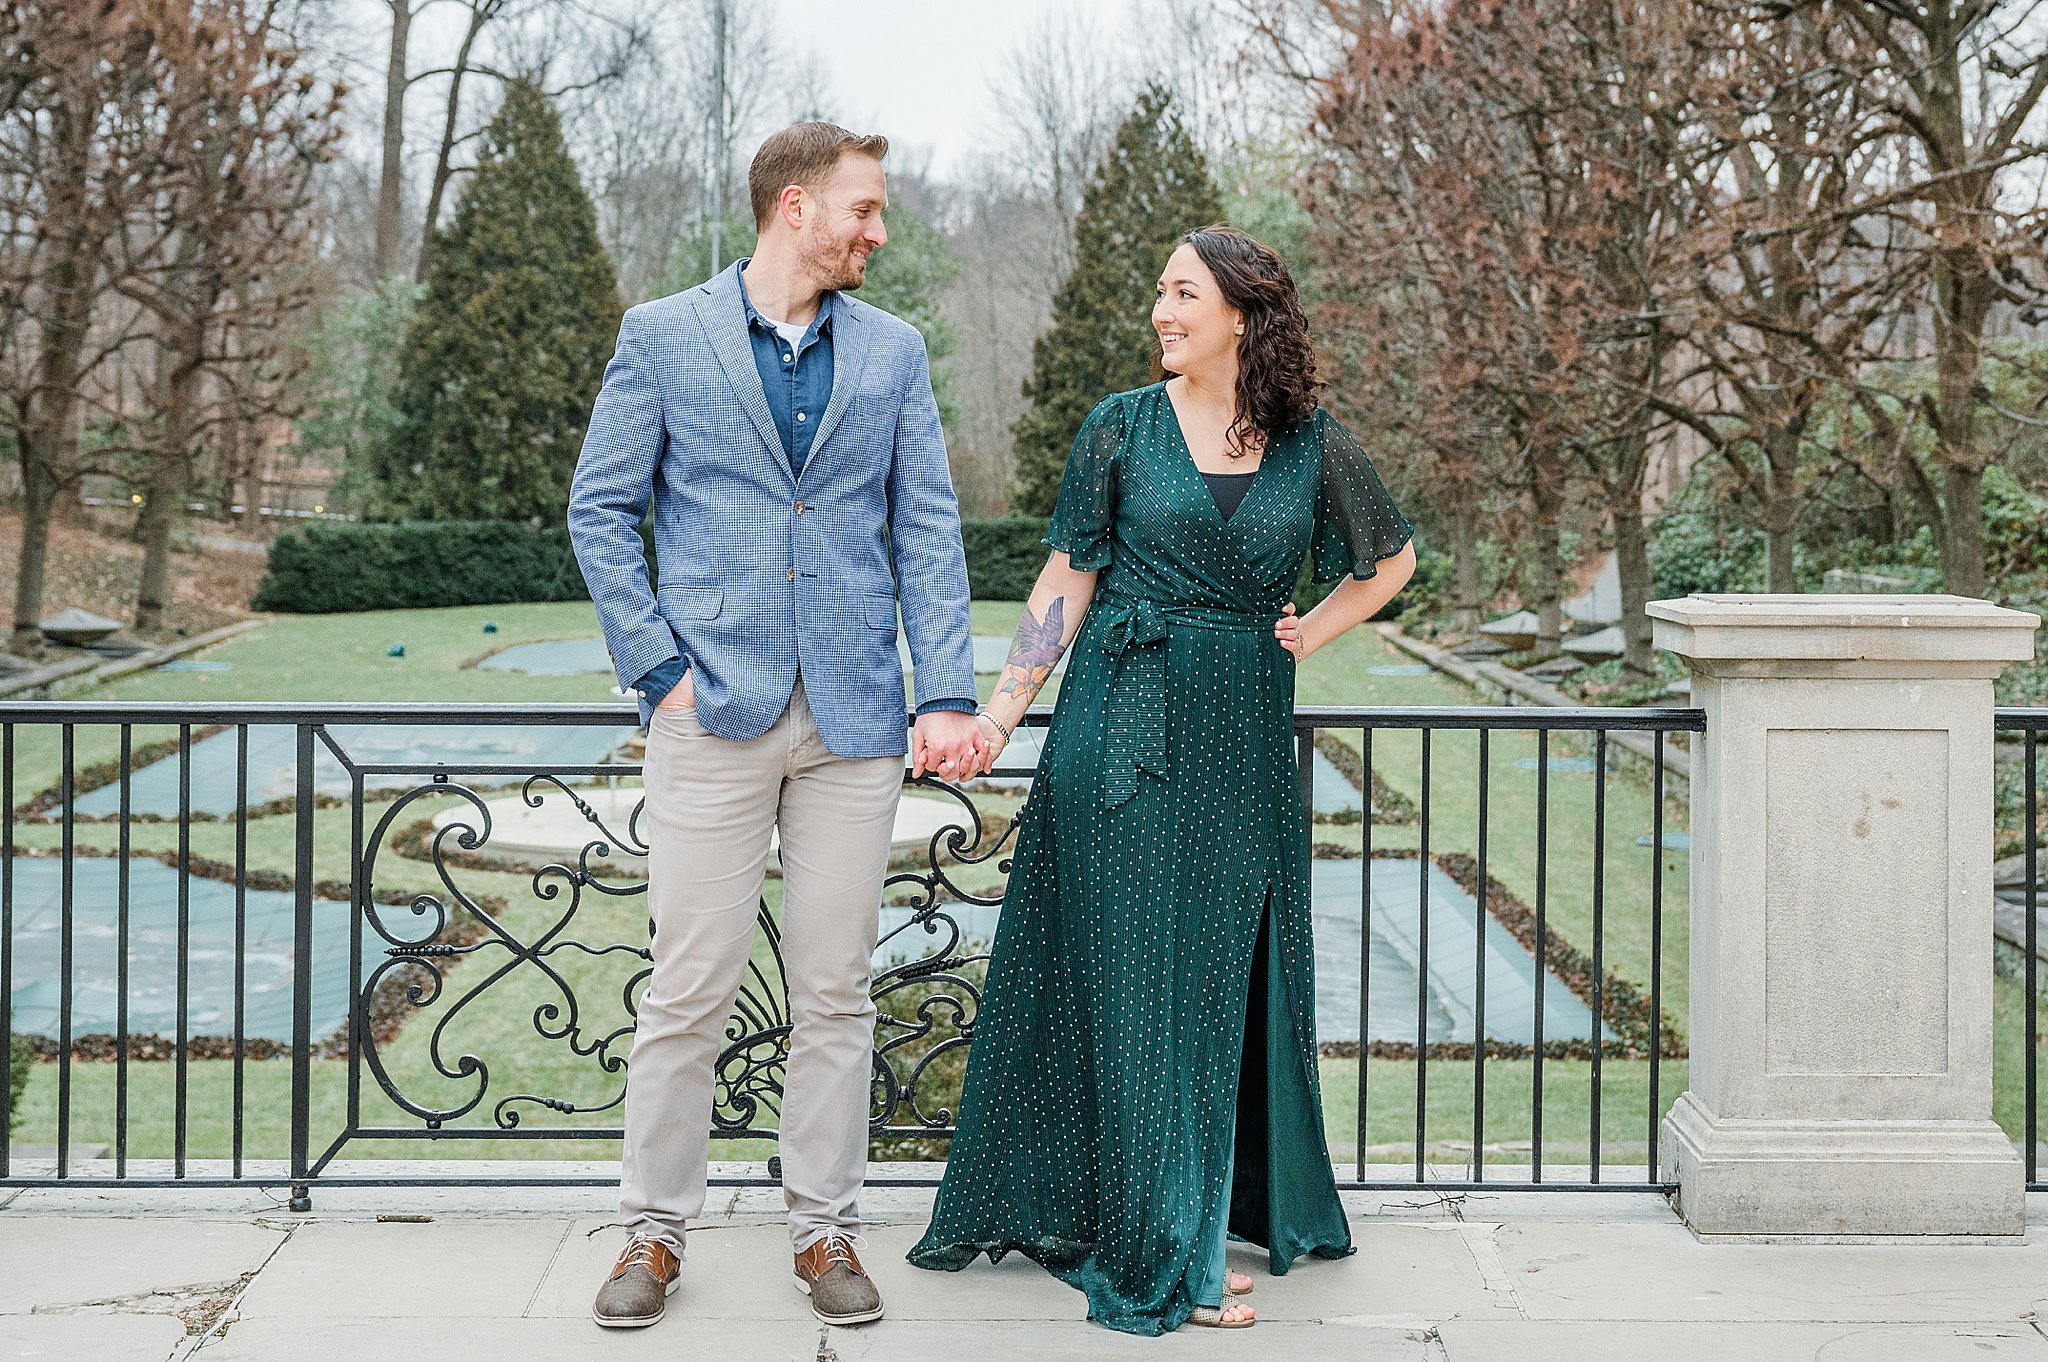 Longwood Gardens Winter Engagement Session Photography Session_4172.jpg